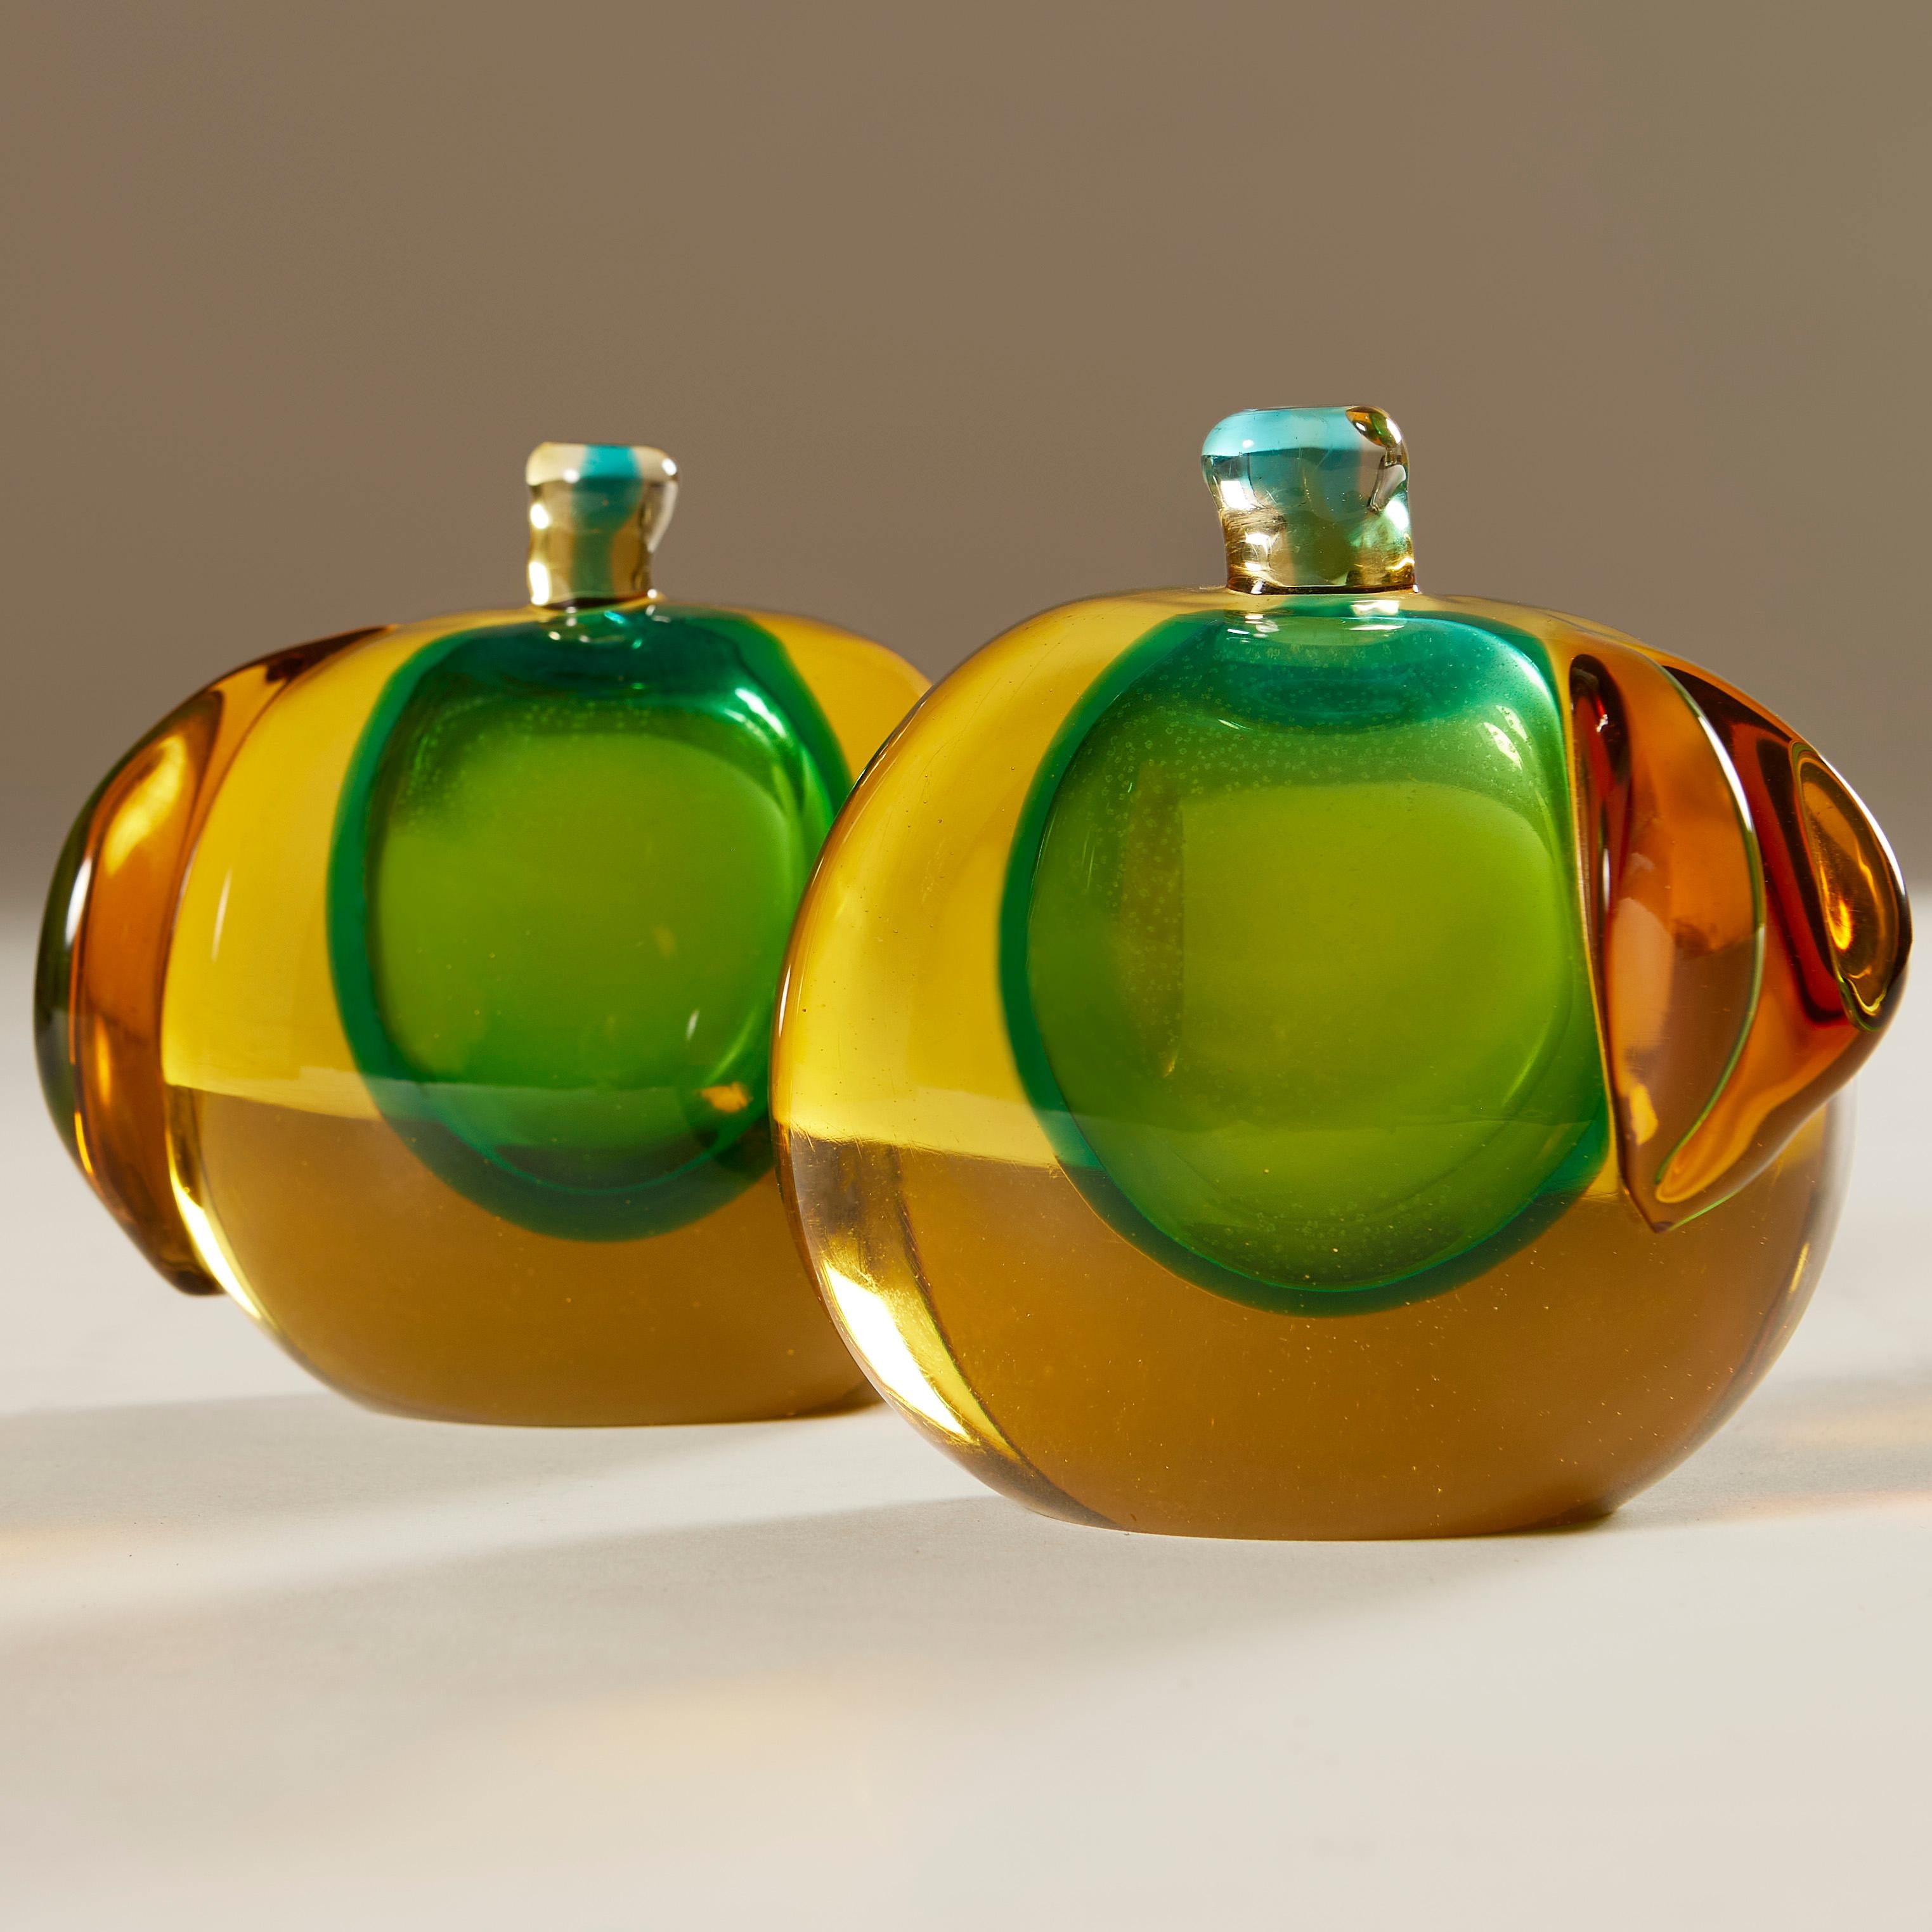 Handblown super smooth rich green, bronze and deep gold Murano glass bookends designed by Salviati. Each with a flat side to become bookends if required and a sculpted single bronze leaf to create the apple shape. Works equally well as a stunning